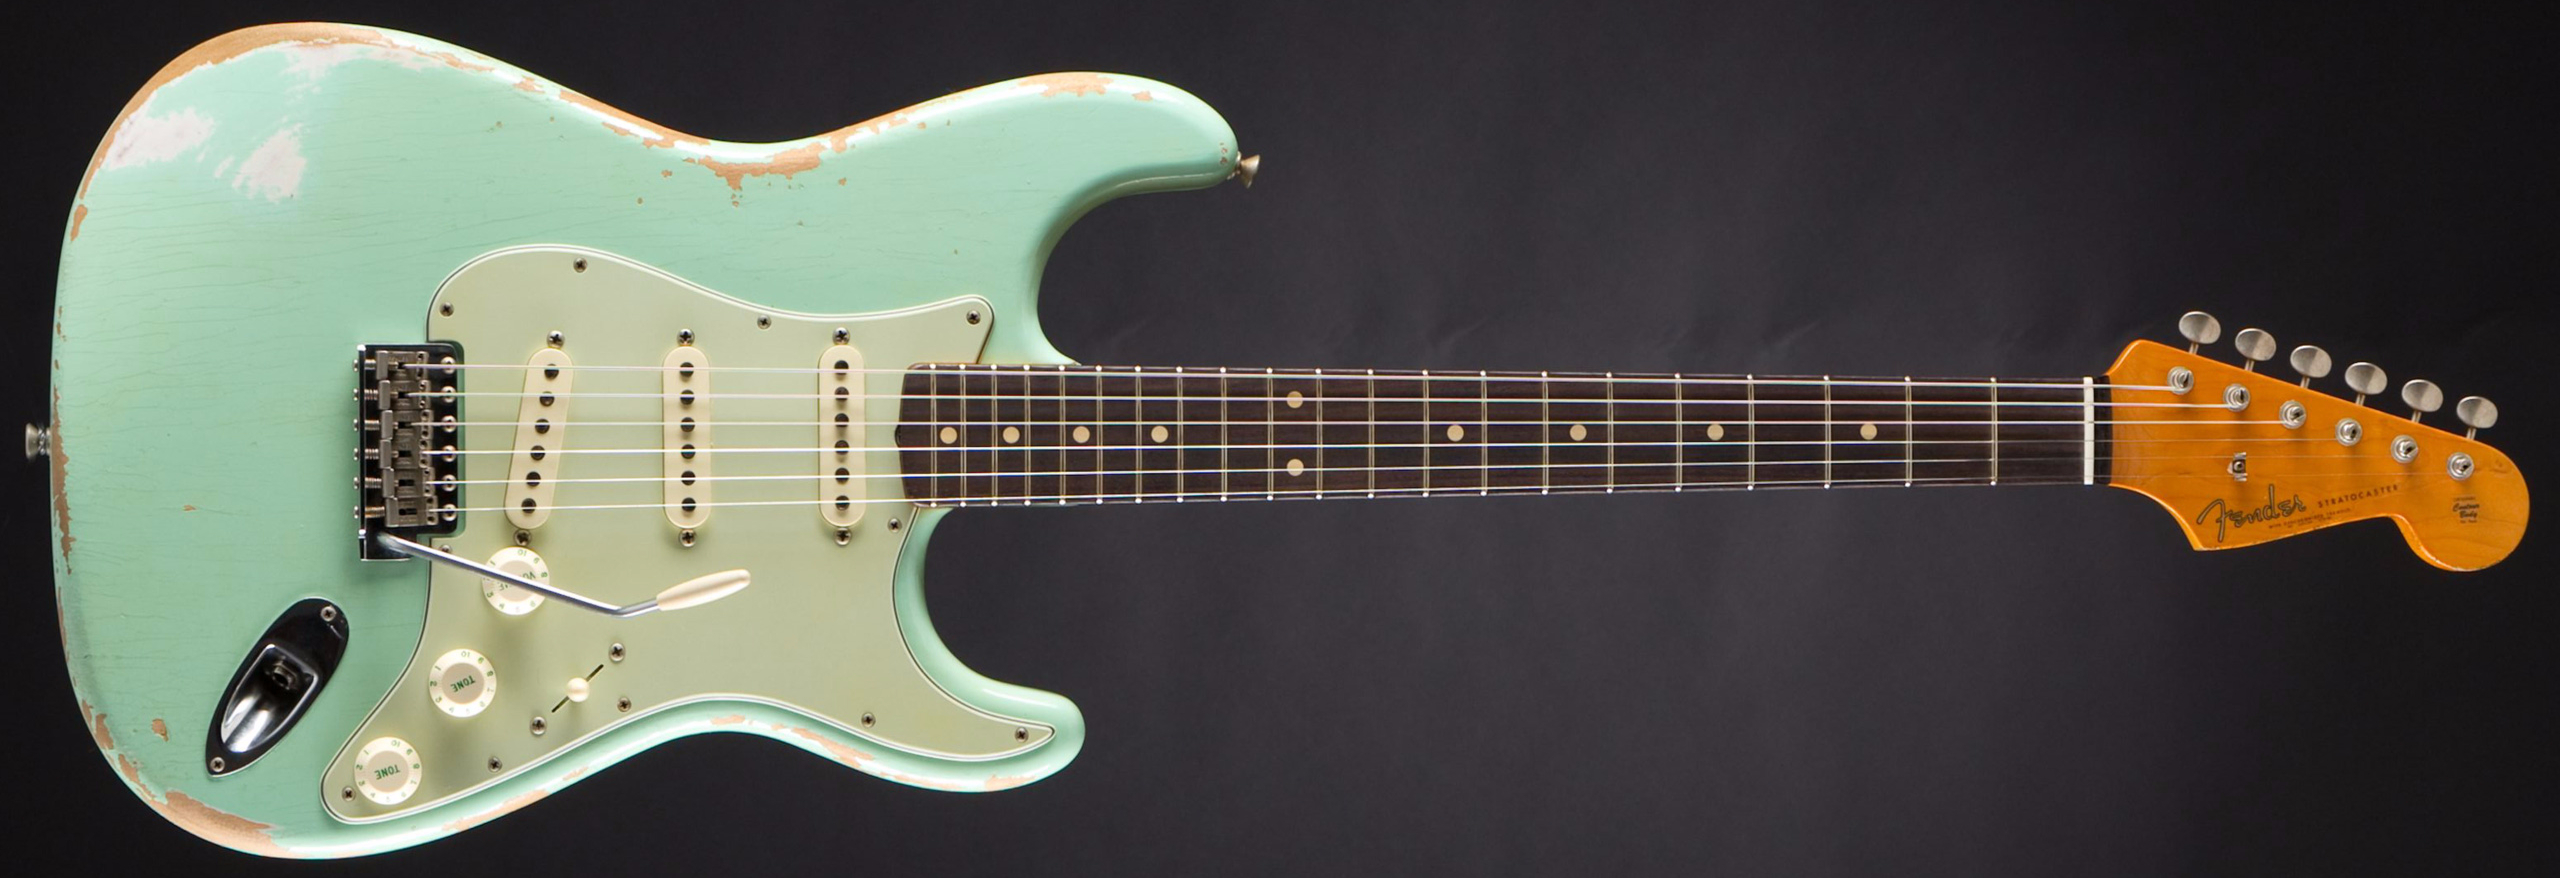 Heavy Relic 1962 Stratocaster Aged Surf Green #R90963 | MUSIC STORE  professional